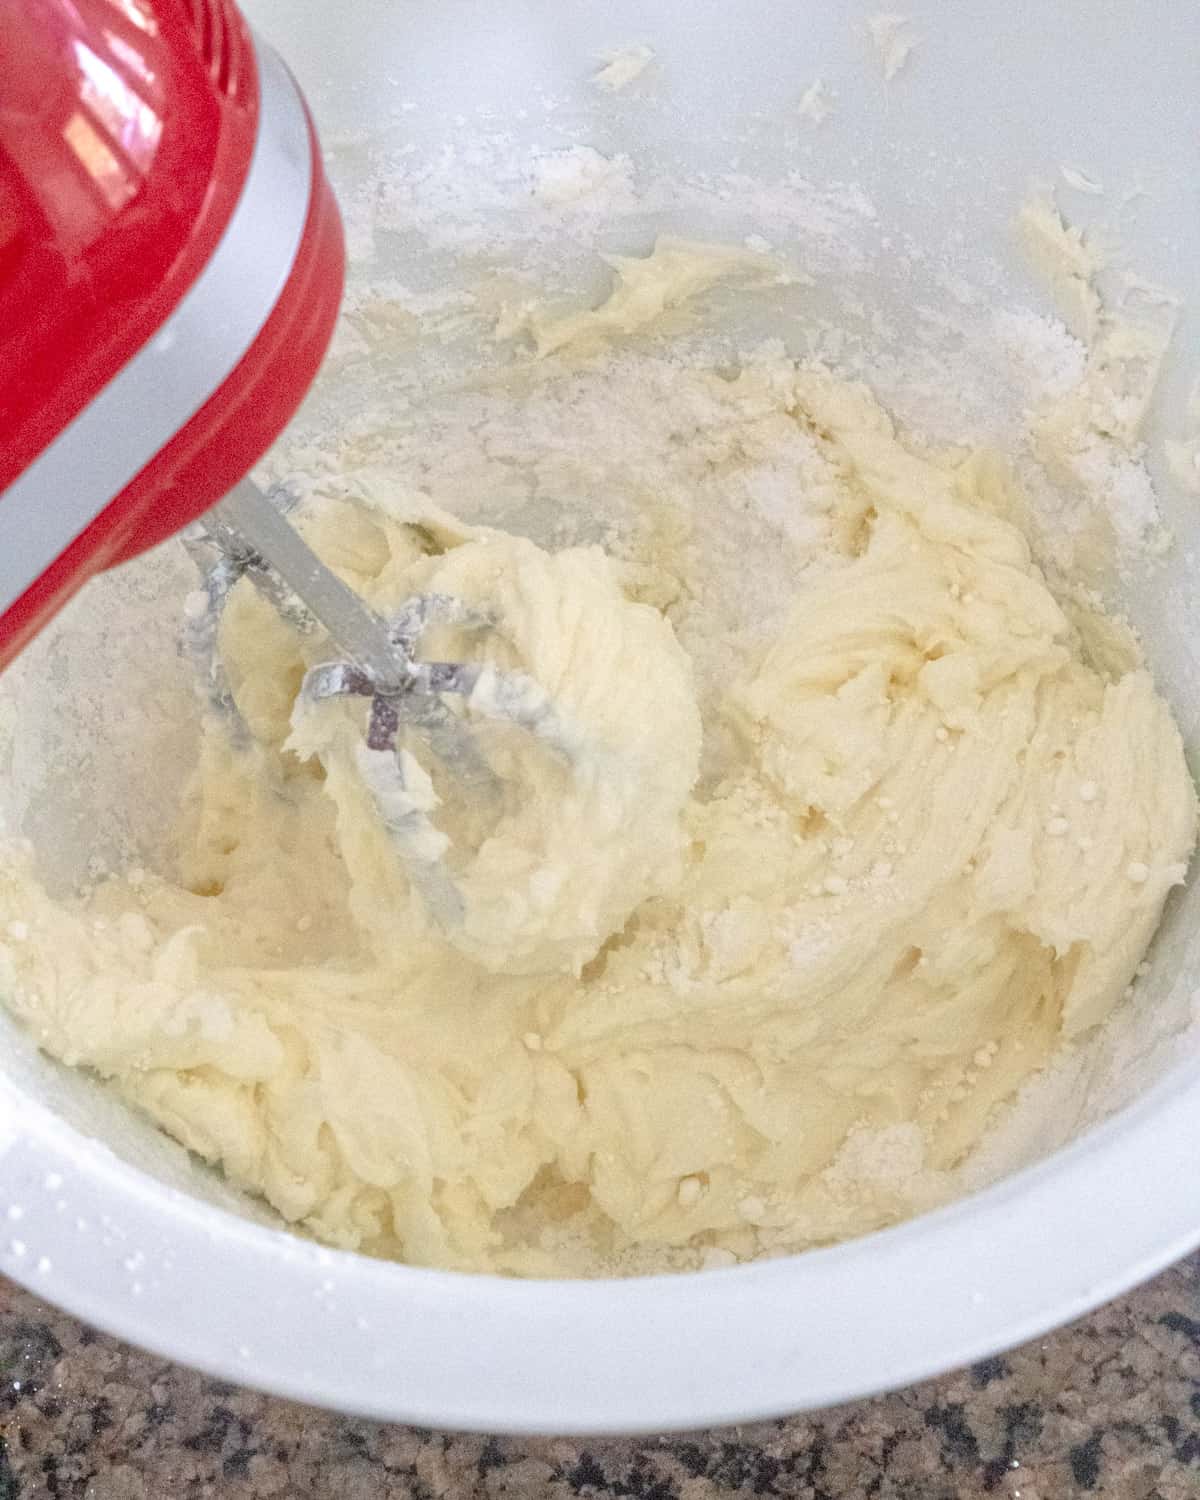 Bowl of cream cheese and powdered sugar mixed together with a red hand mixer.